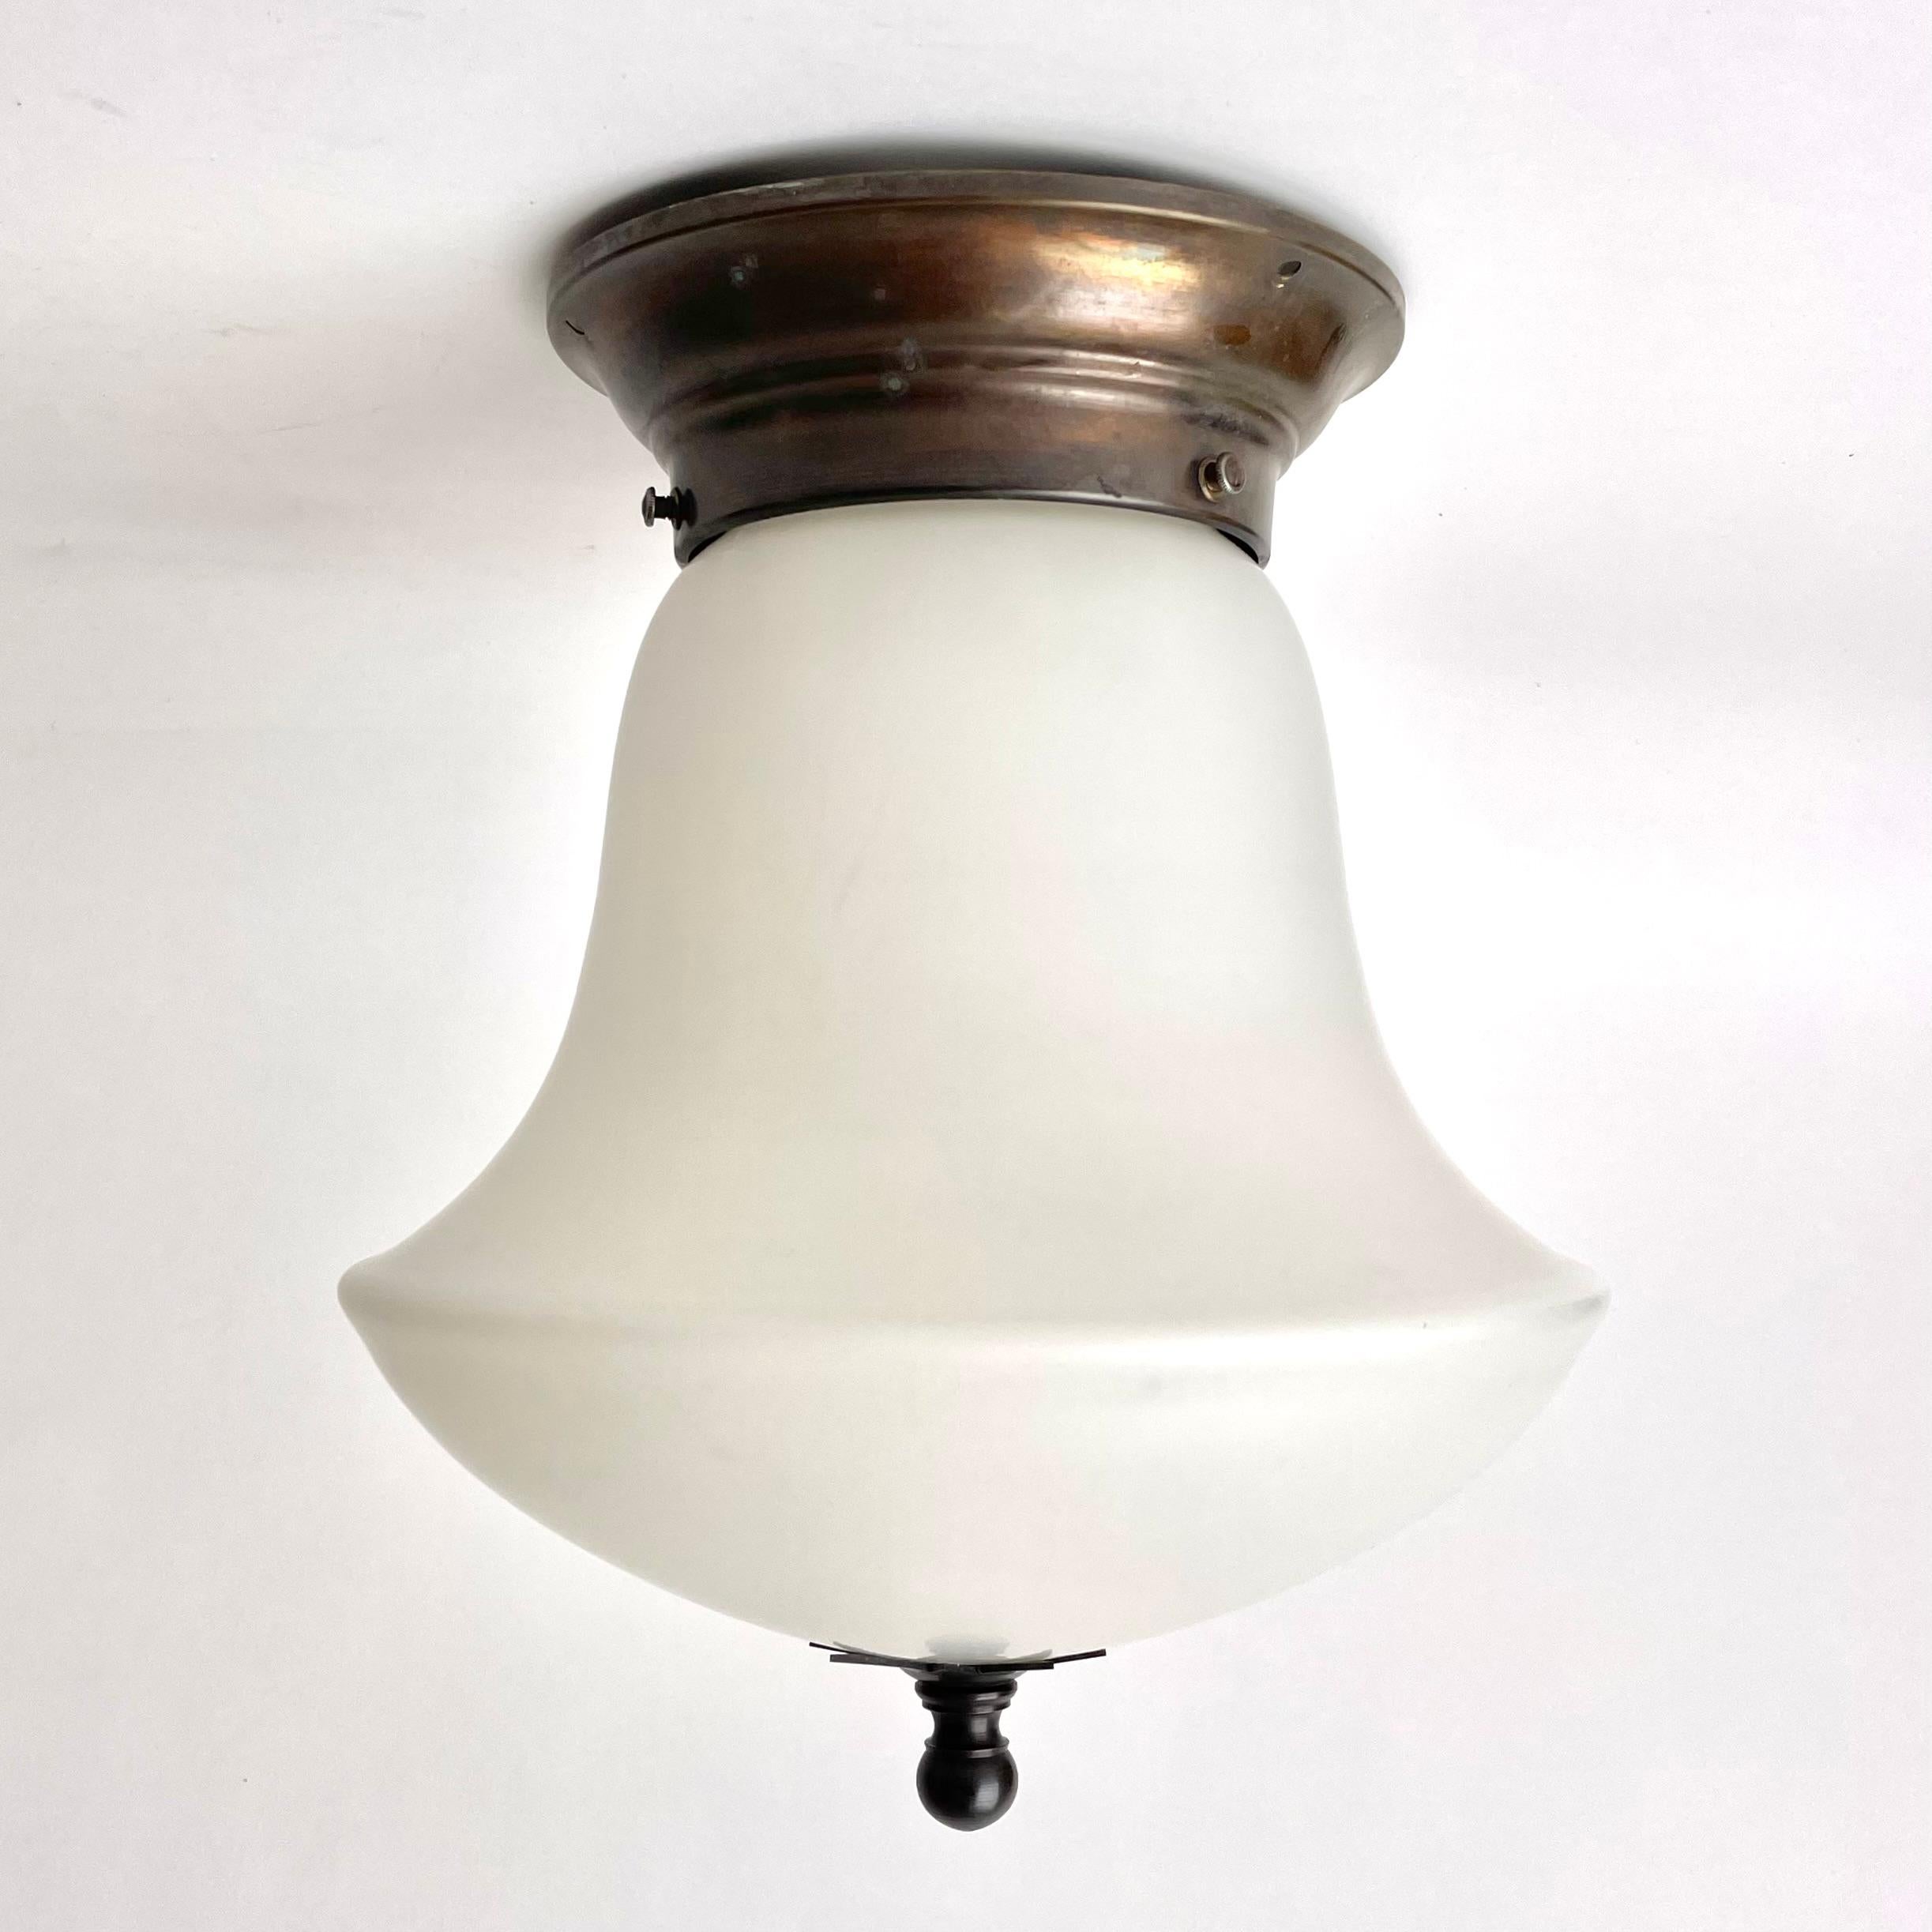 Art Deco Swedish Grace Flush Mount Ceiling Lamp, Frosted Glass and Patinated Brass, 1920s